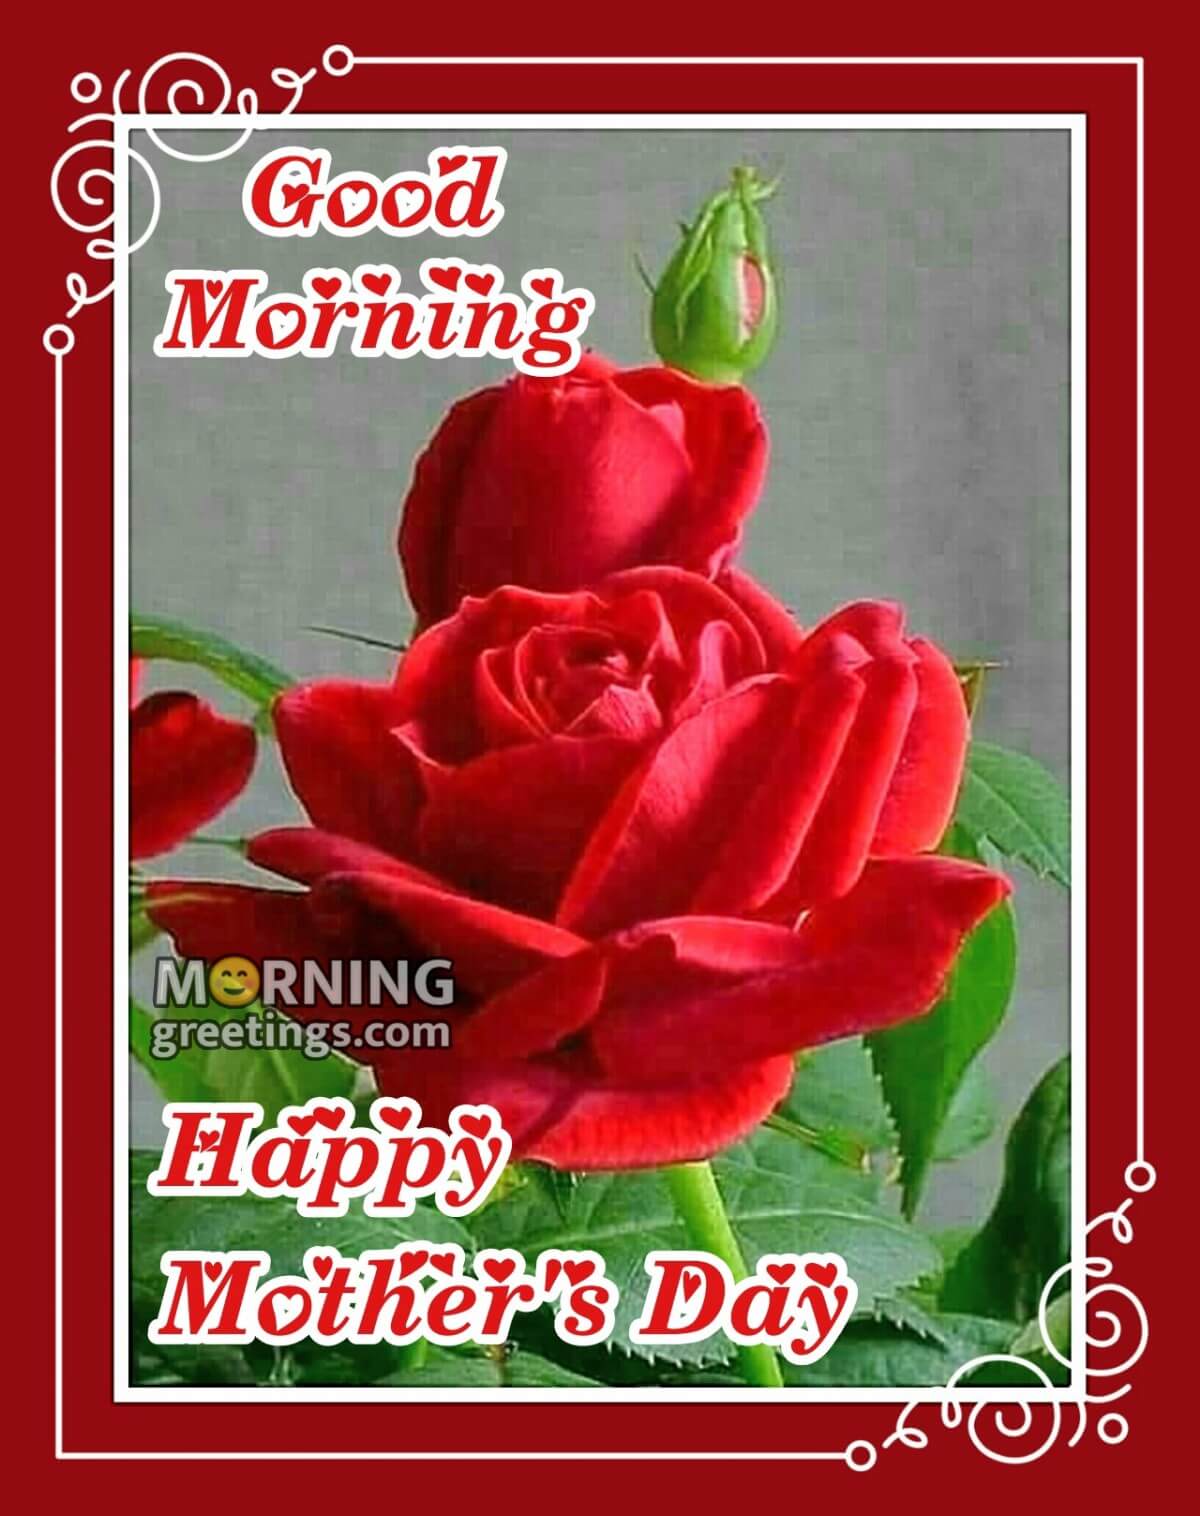 Good Morning Happy Mother’s Day